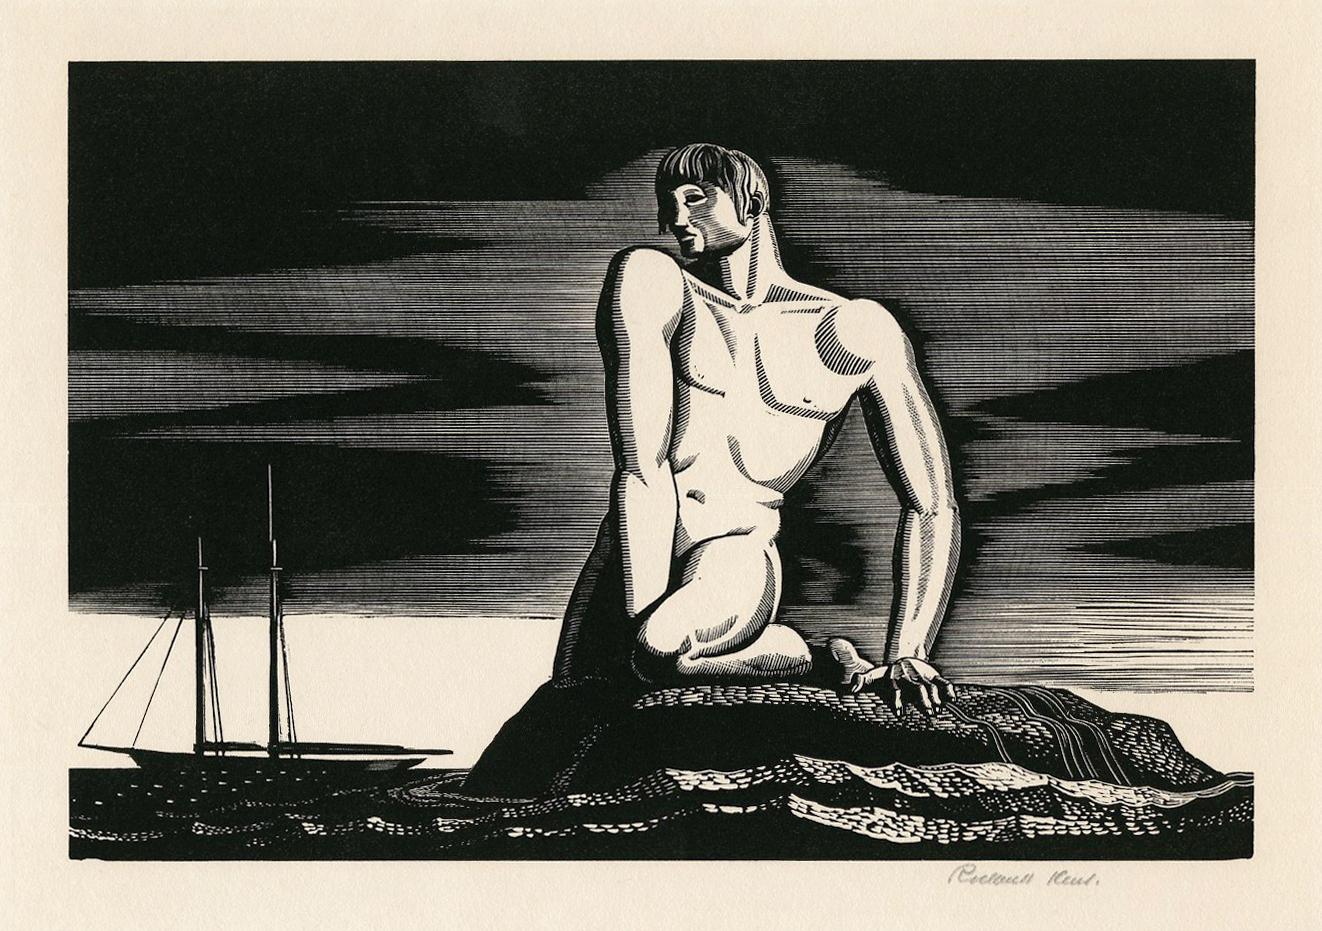 'The Bather' — 1930s American Modernism